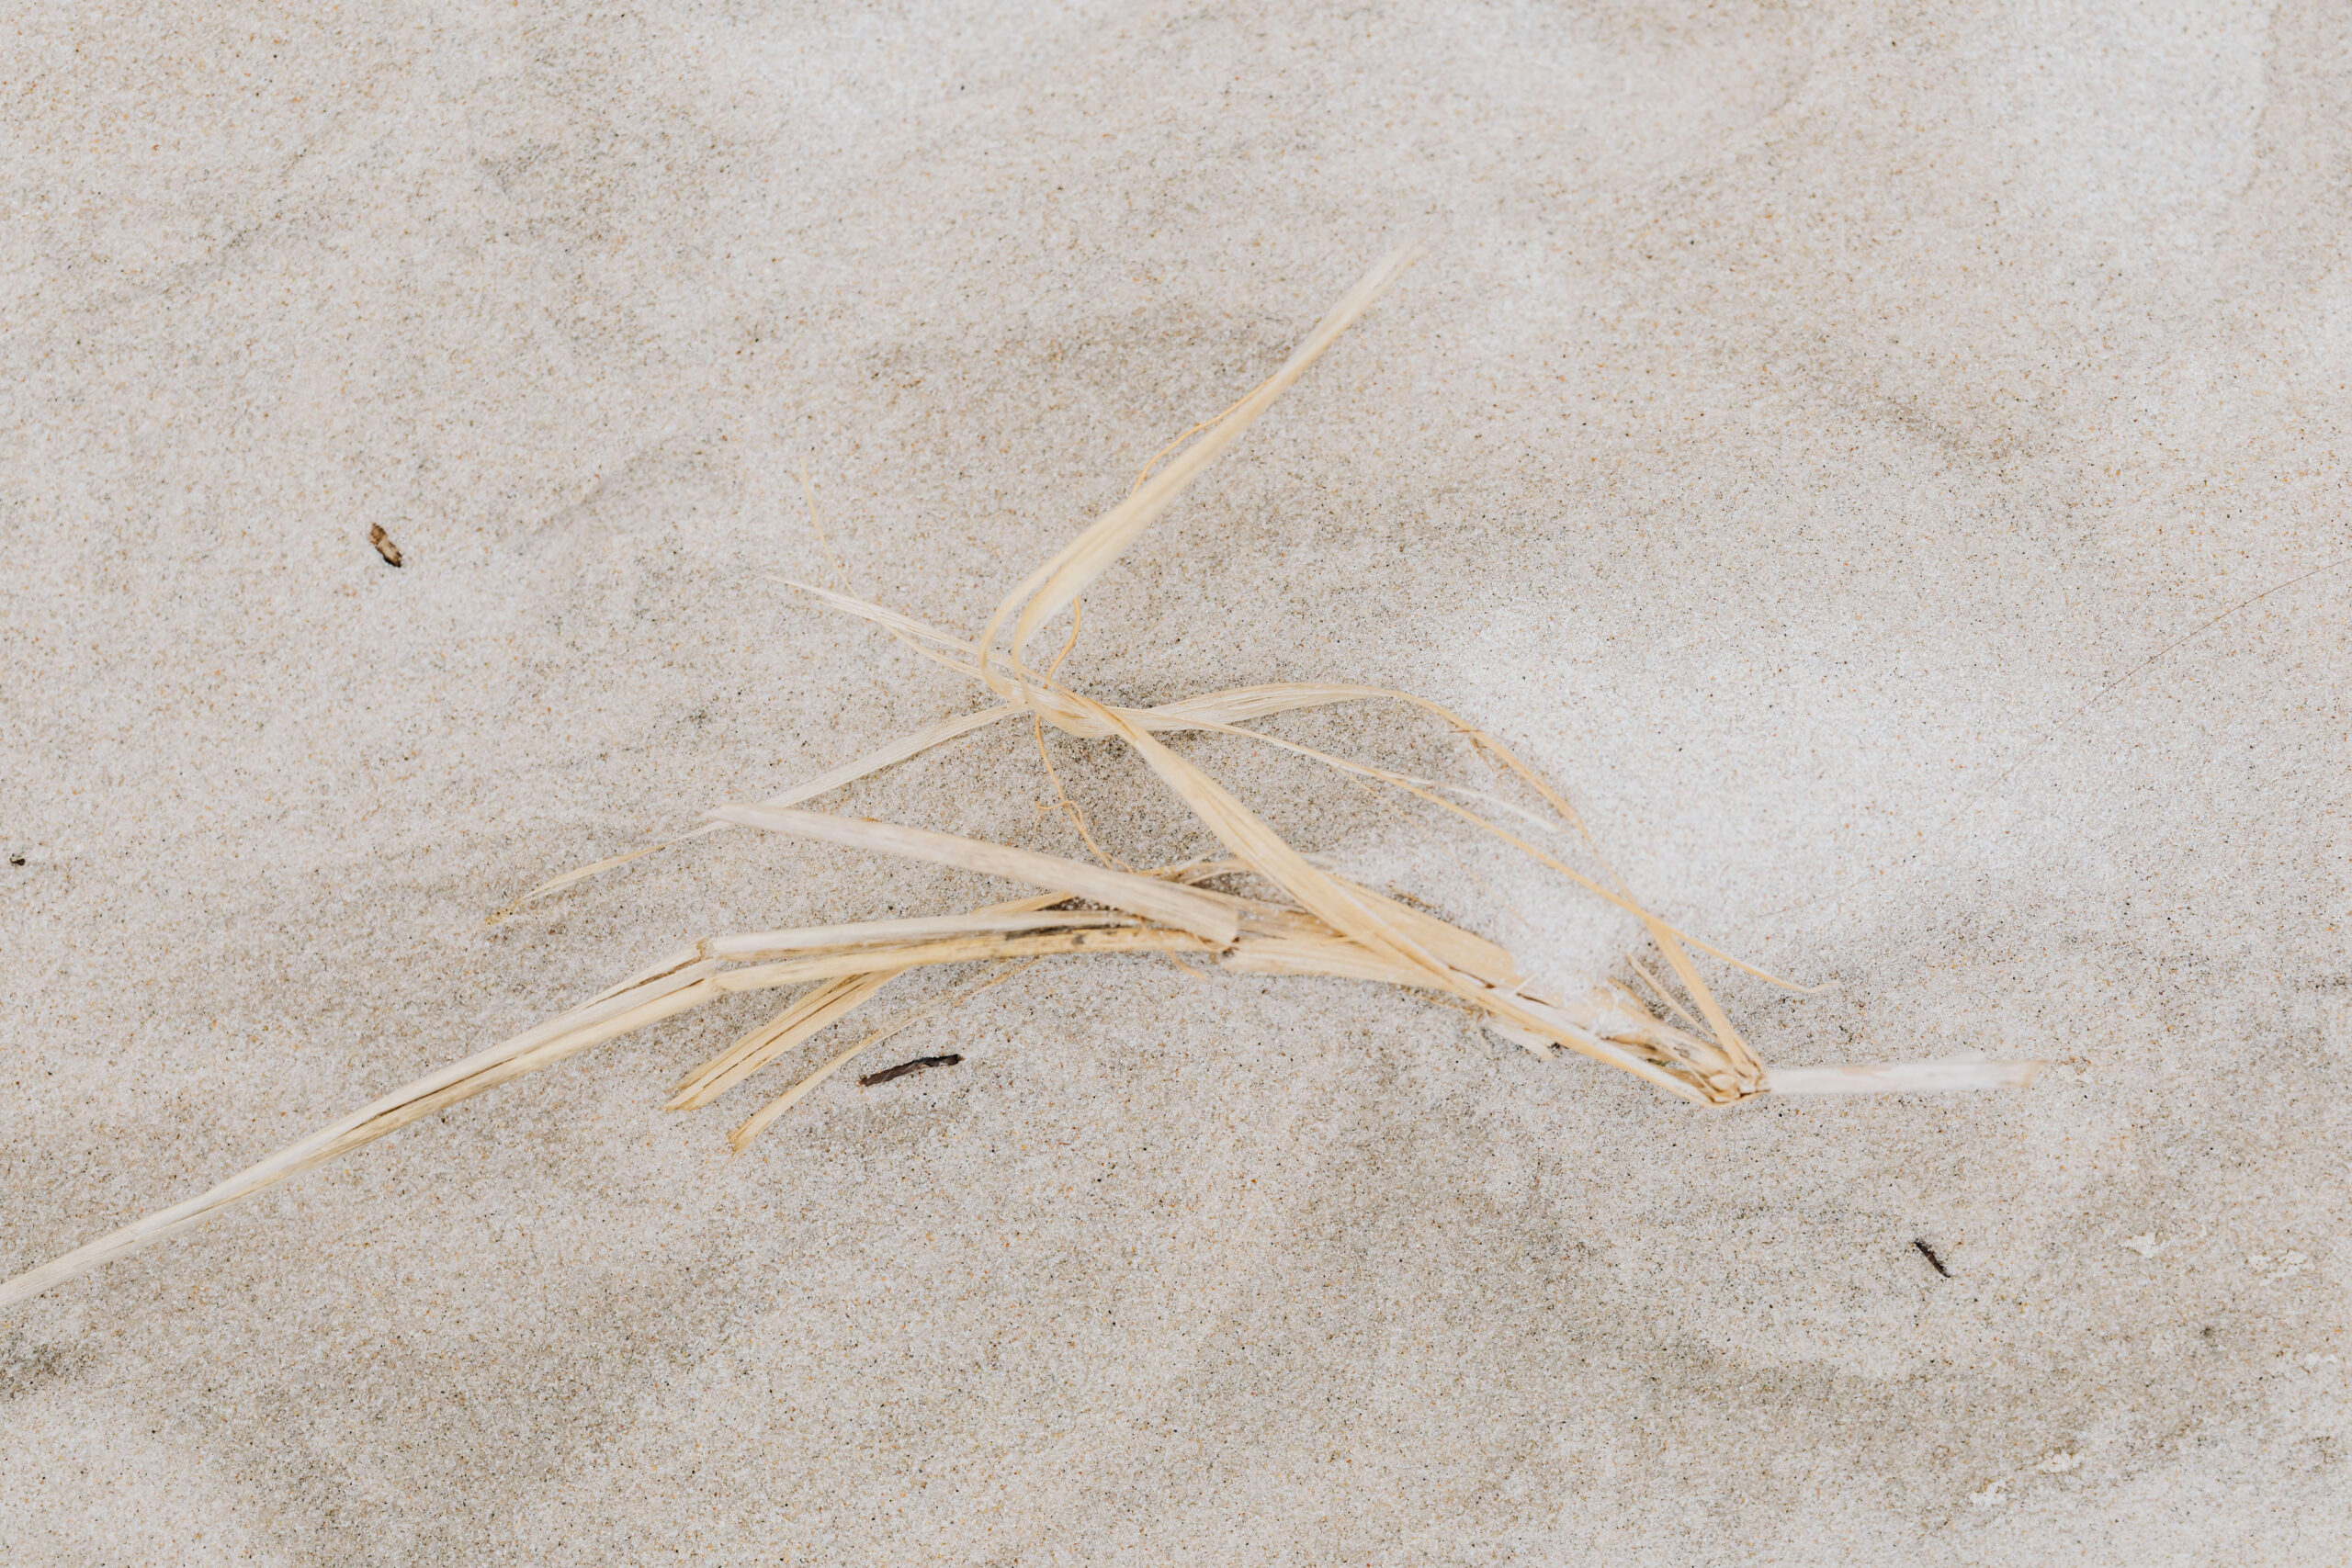 The Empty Nester Club dried grass on the beach